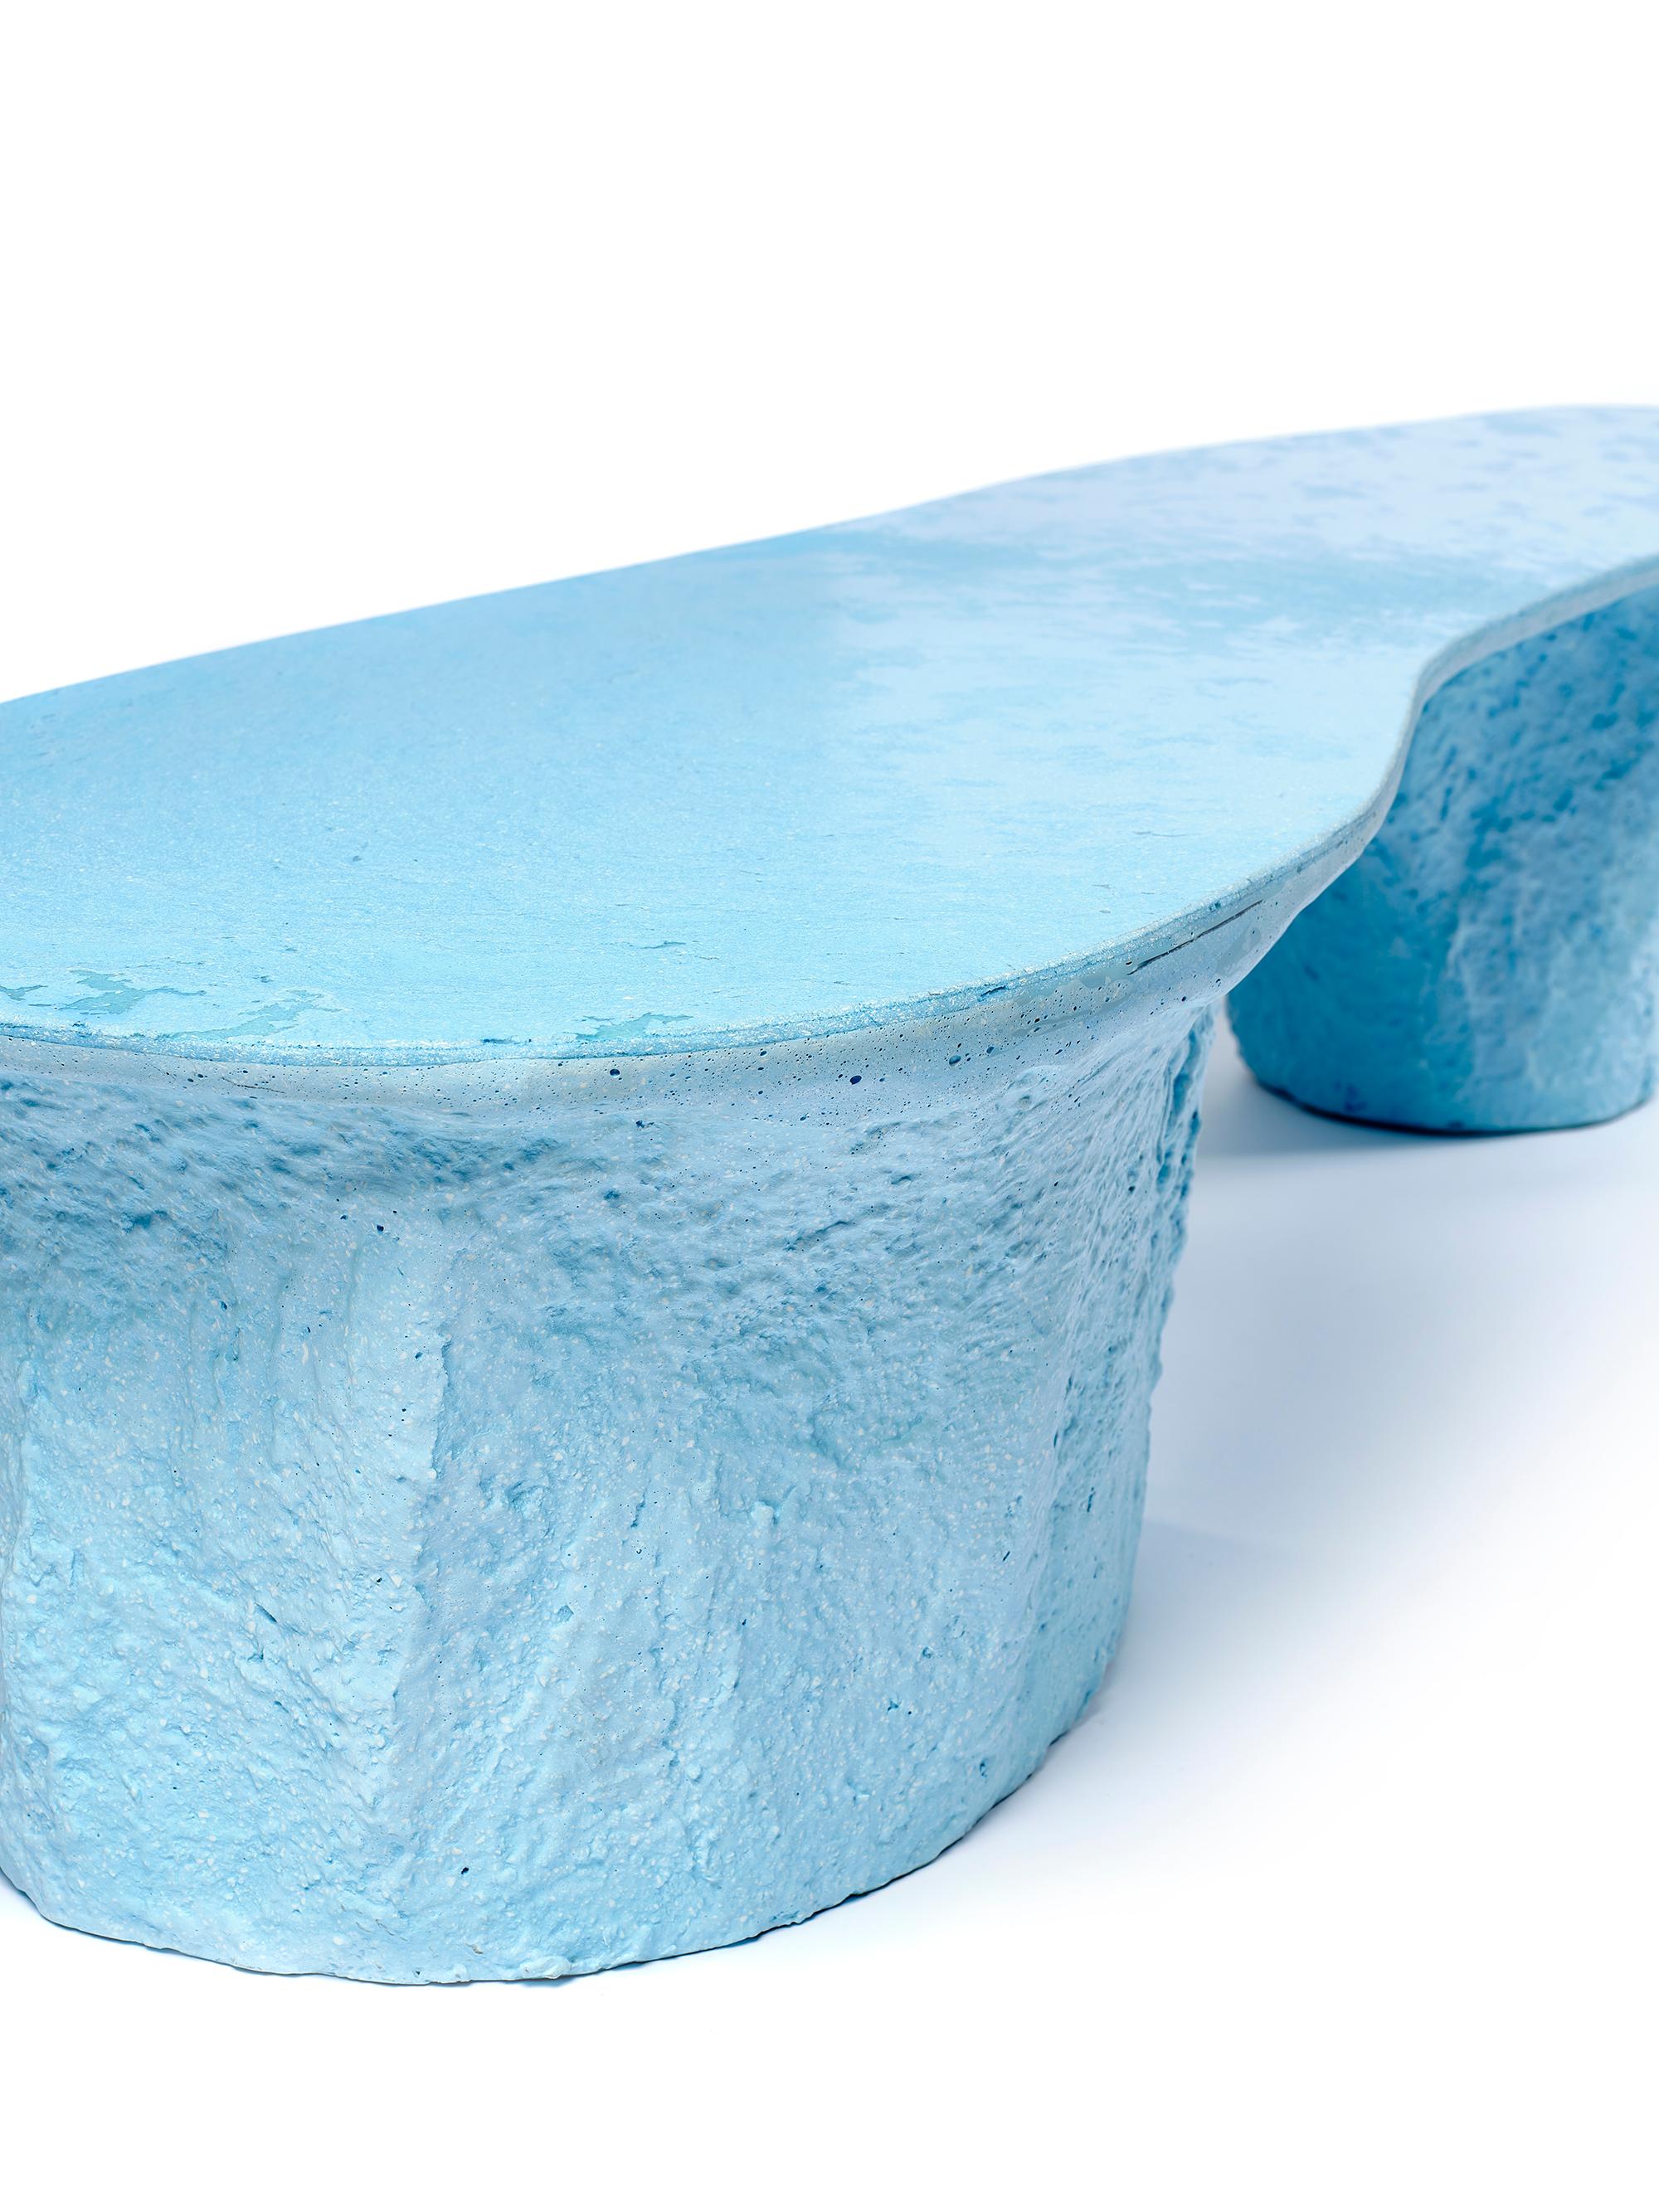 The light blue Kernel table is a unique piece made entirely by hand by the designer. Completely built in Glebanite, a special blend of recycled and recyclable fiberglass. An artistic work of circular economy that takes care of the planet earth and